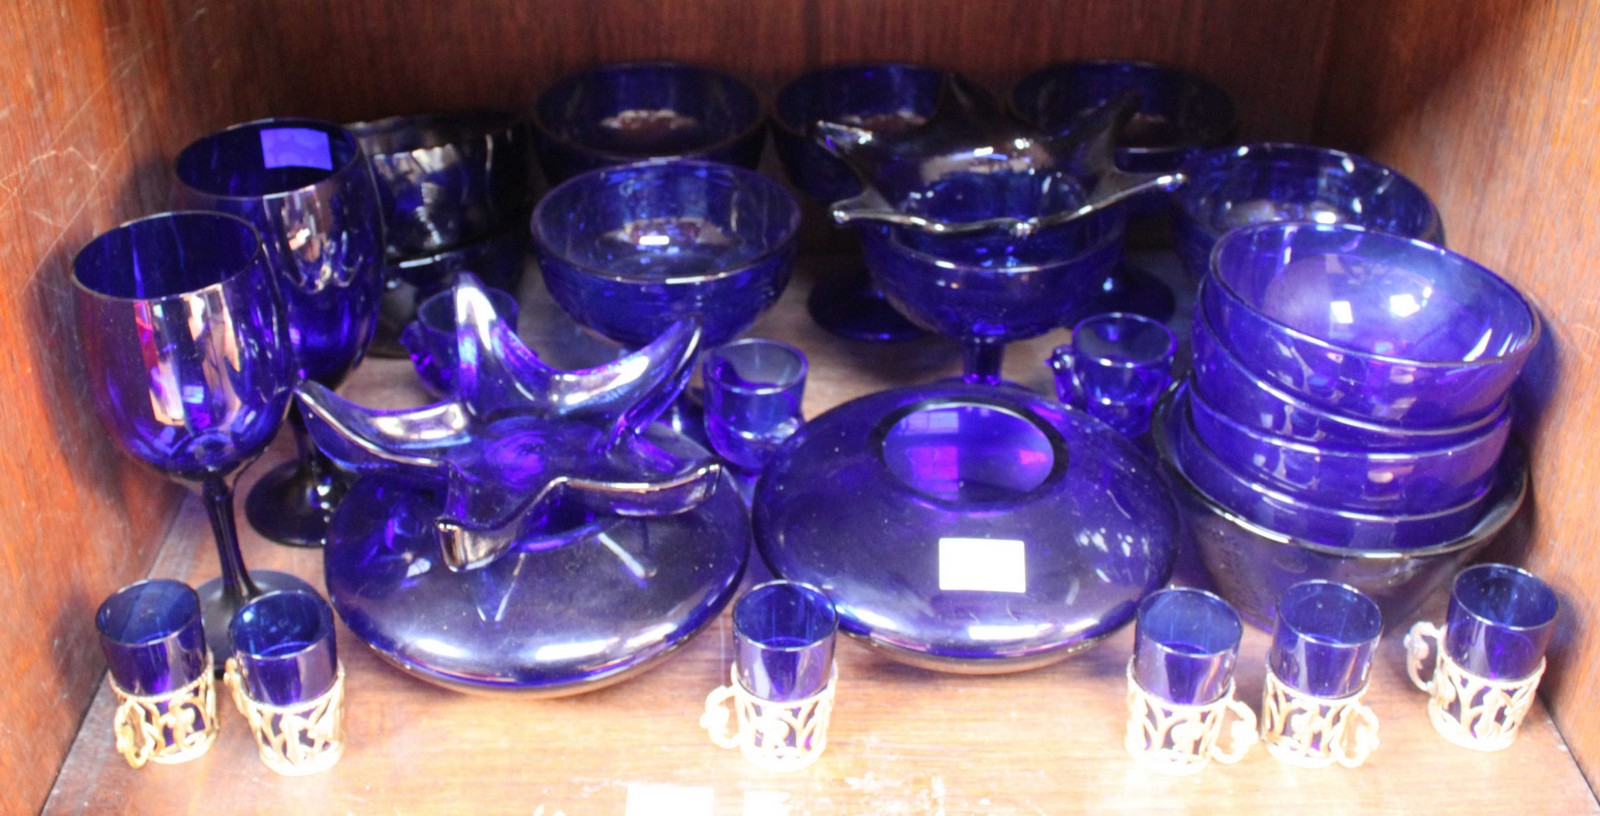 SECTIONS 41 & 42. Two shelves of blue glasswares including glasses, bowls, trinket dishes, perfume